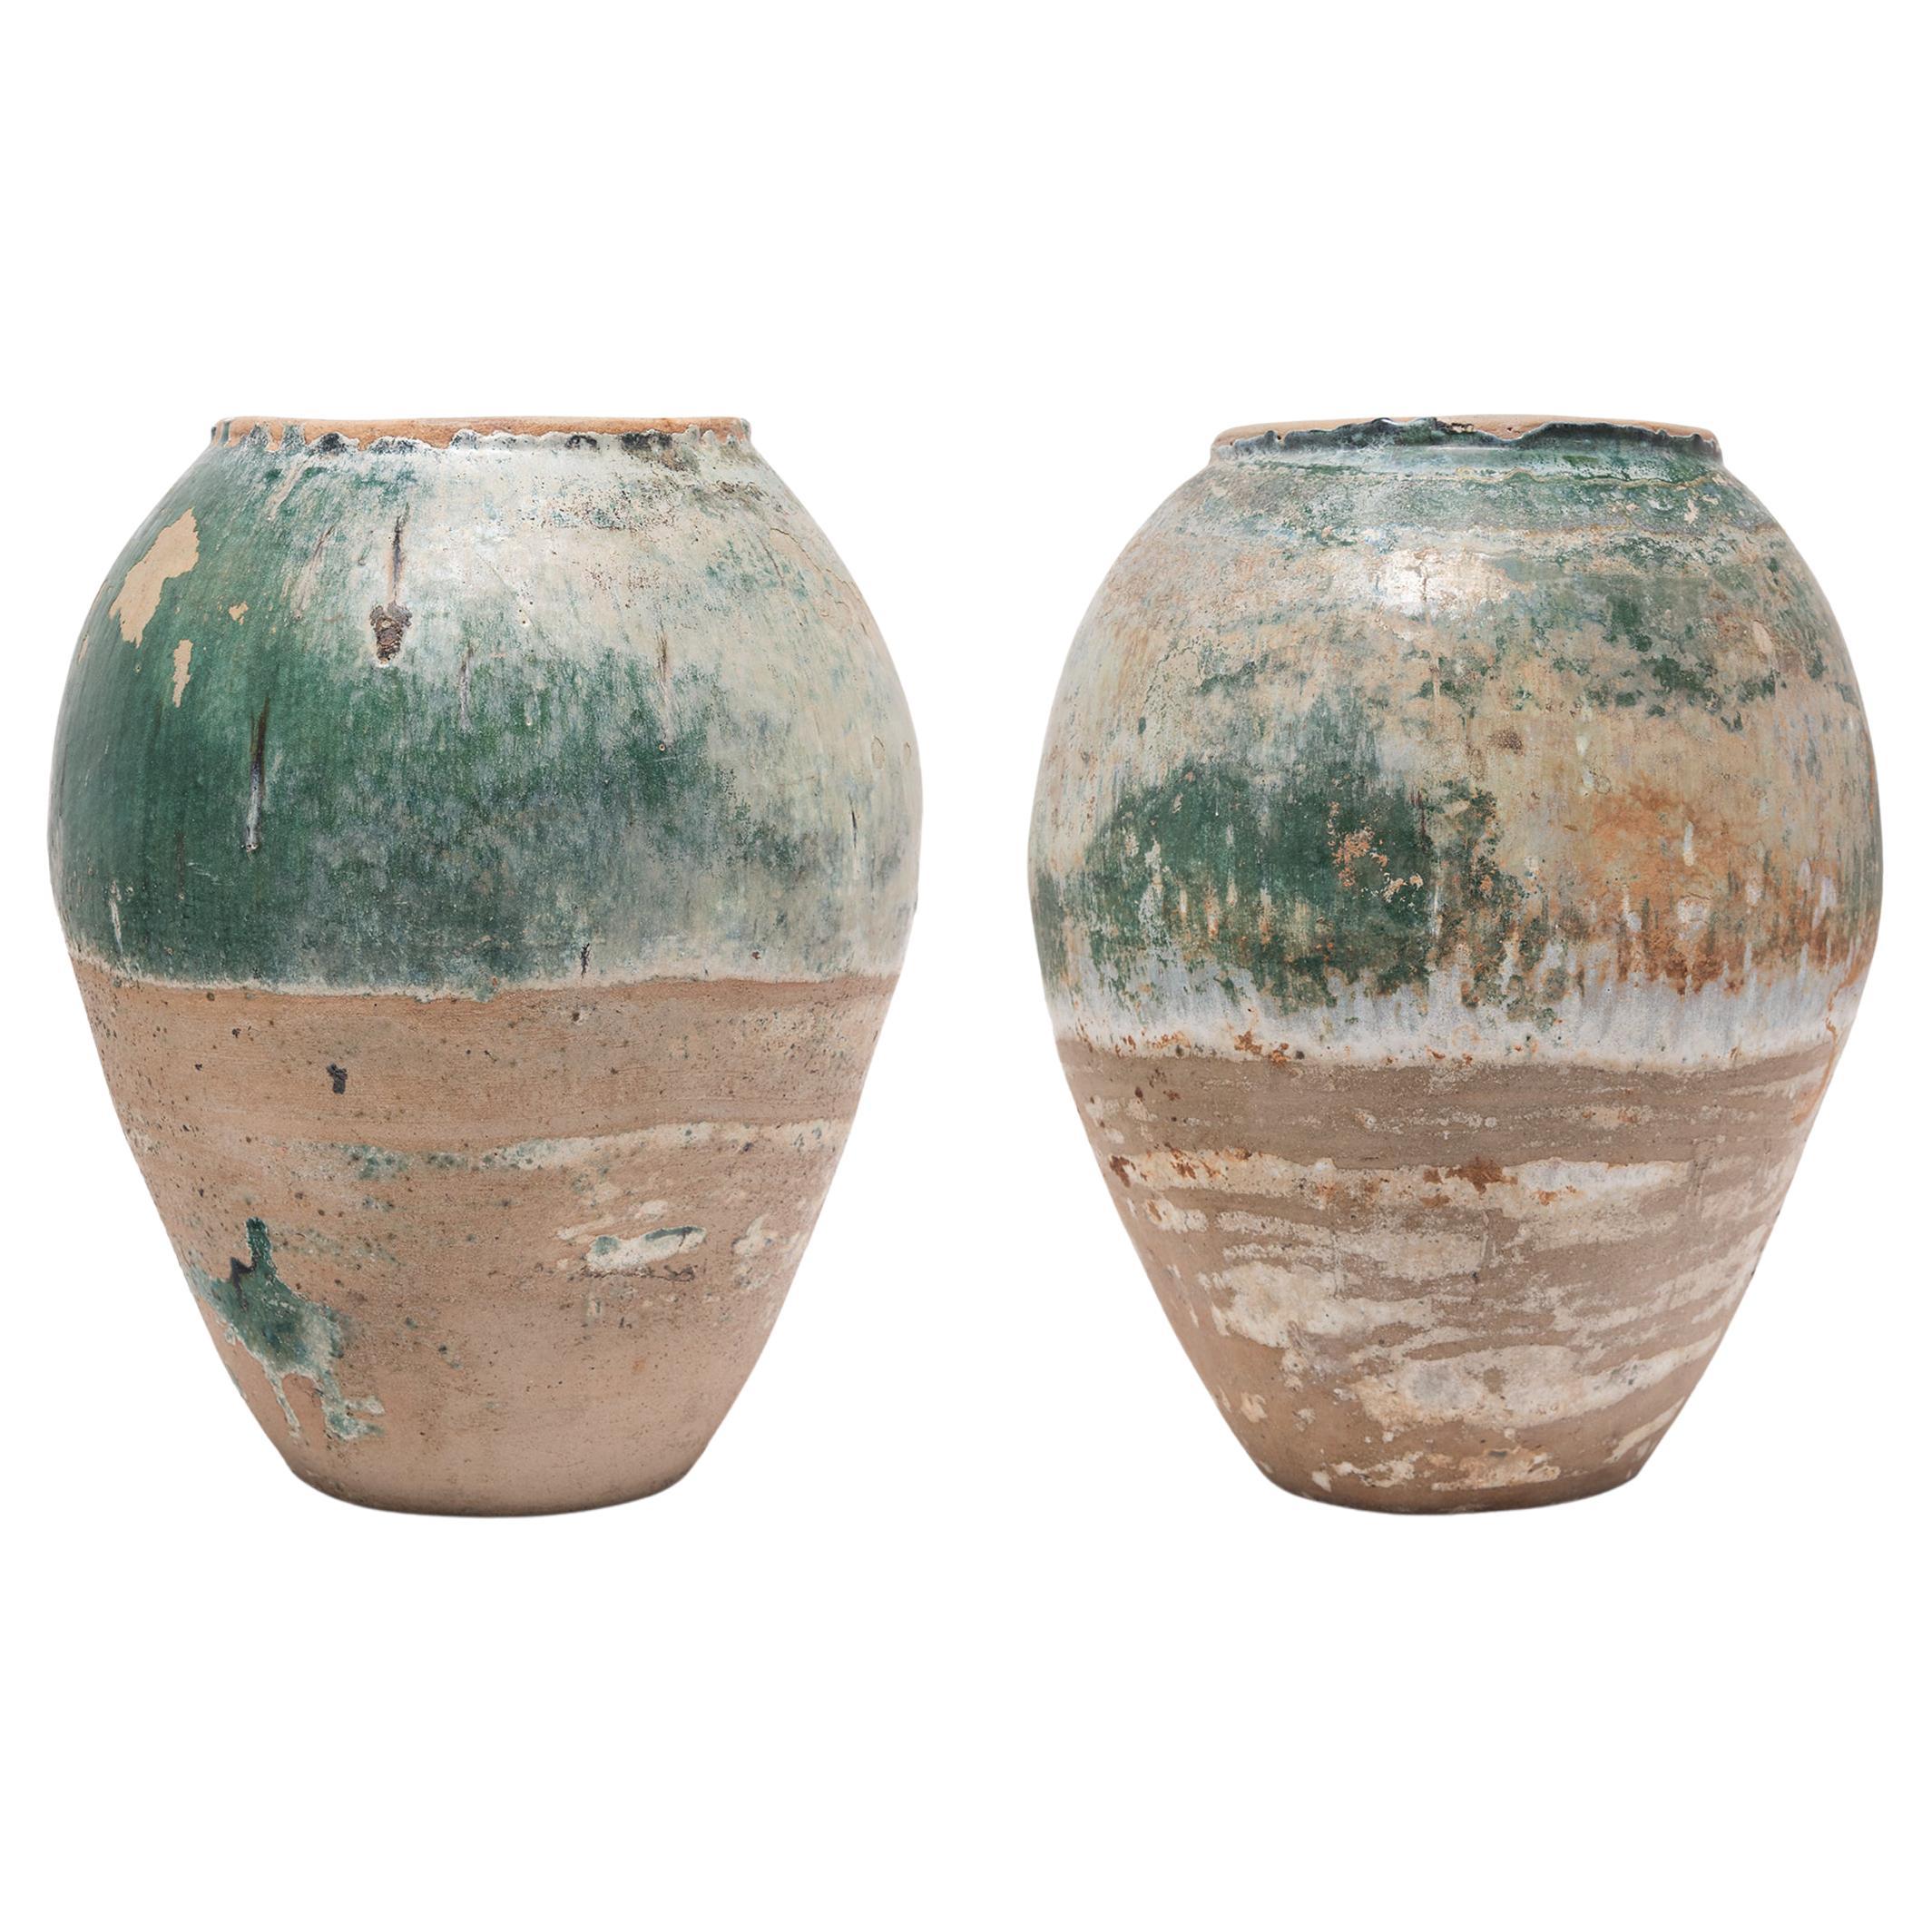 Provincial Chinese Green Glazed Vessels, c. 1900